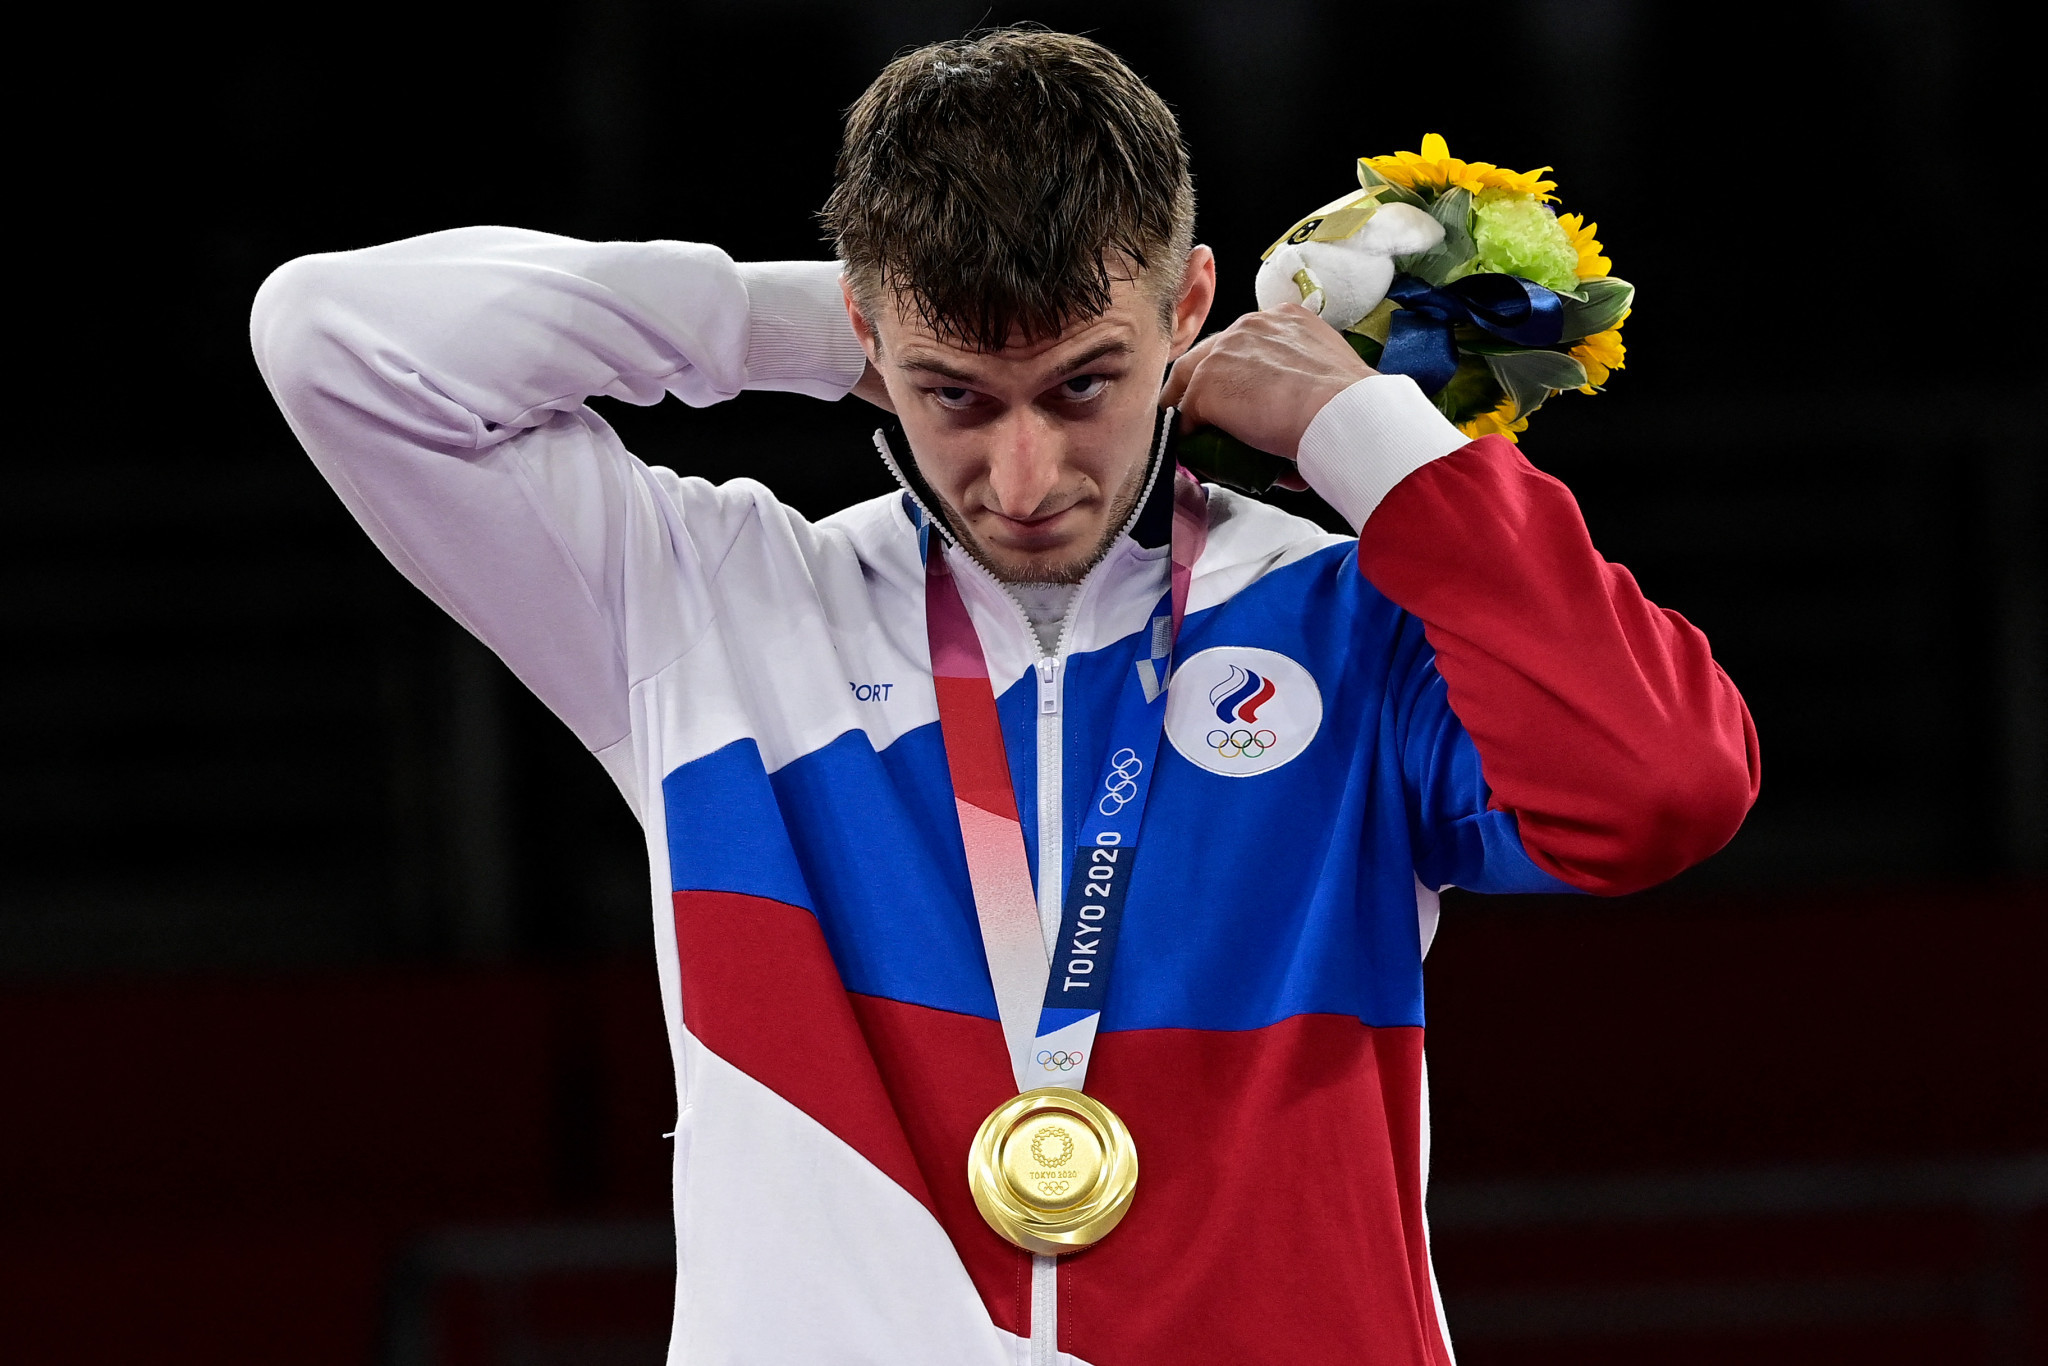 Russia's Vladislav Larin is set to return to World Taekwondo competition as an individual neutral next month, despite a ban from the World Championships earlier this year ©Getty Images